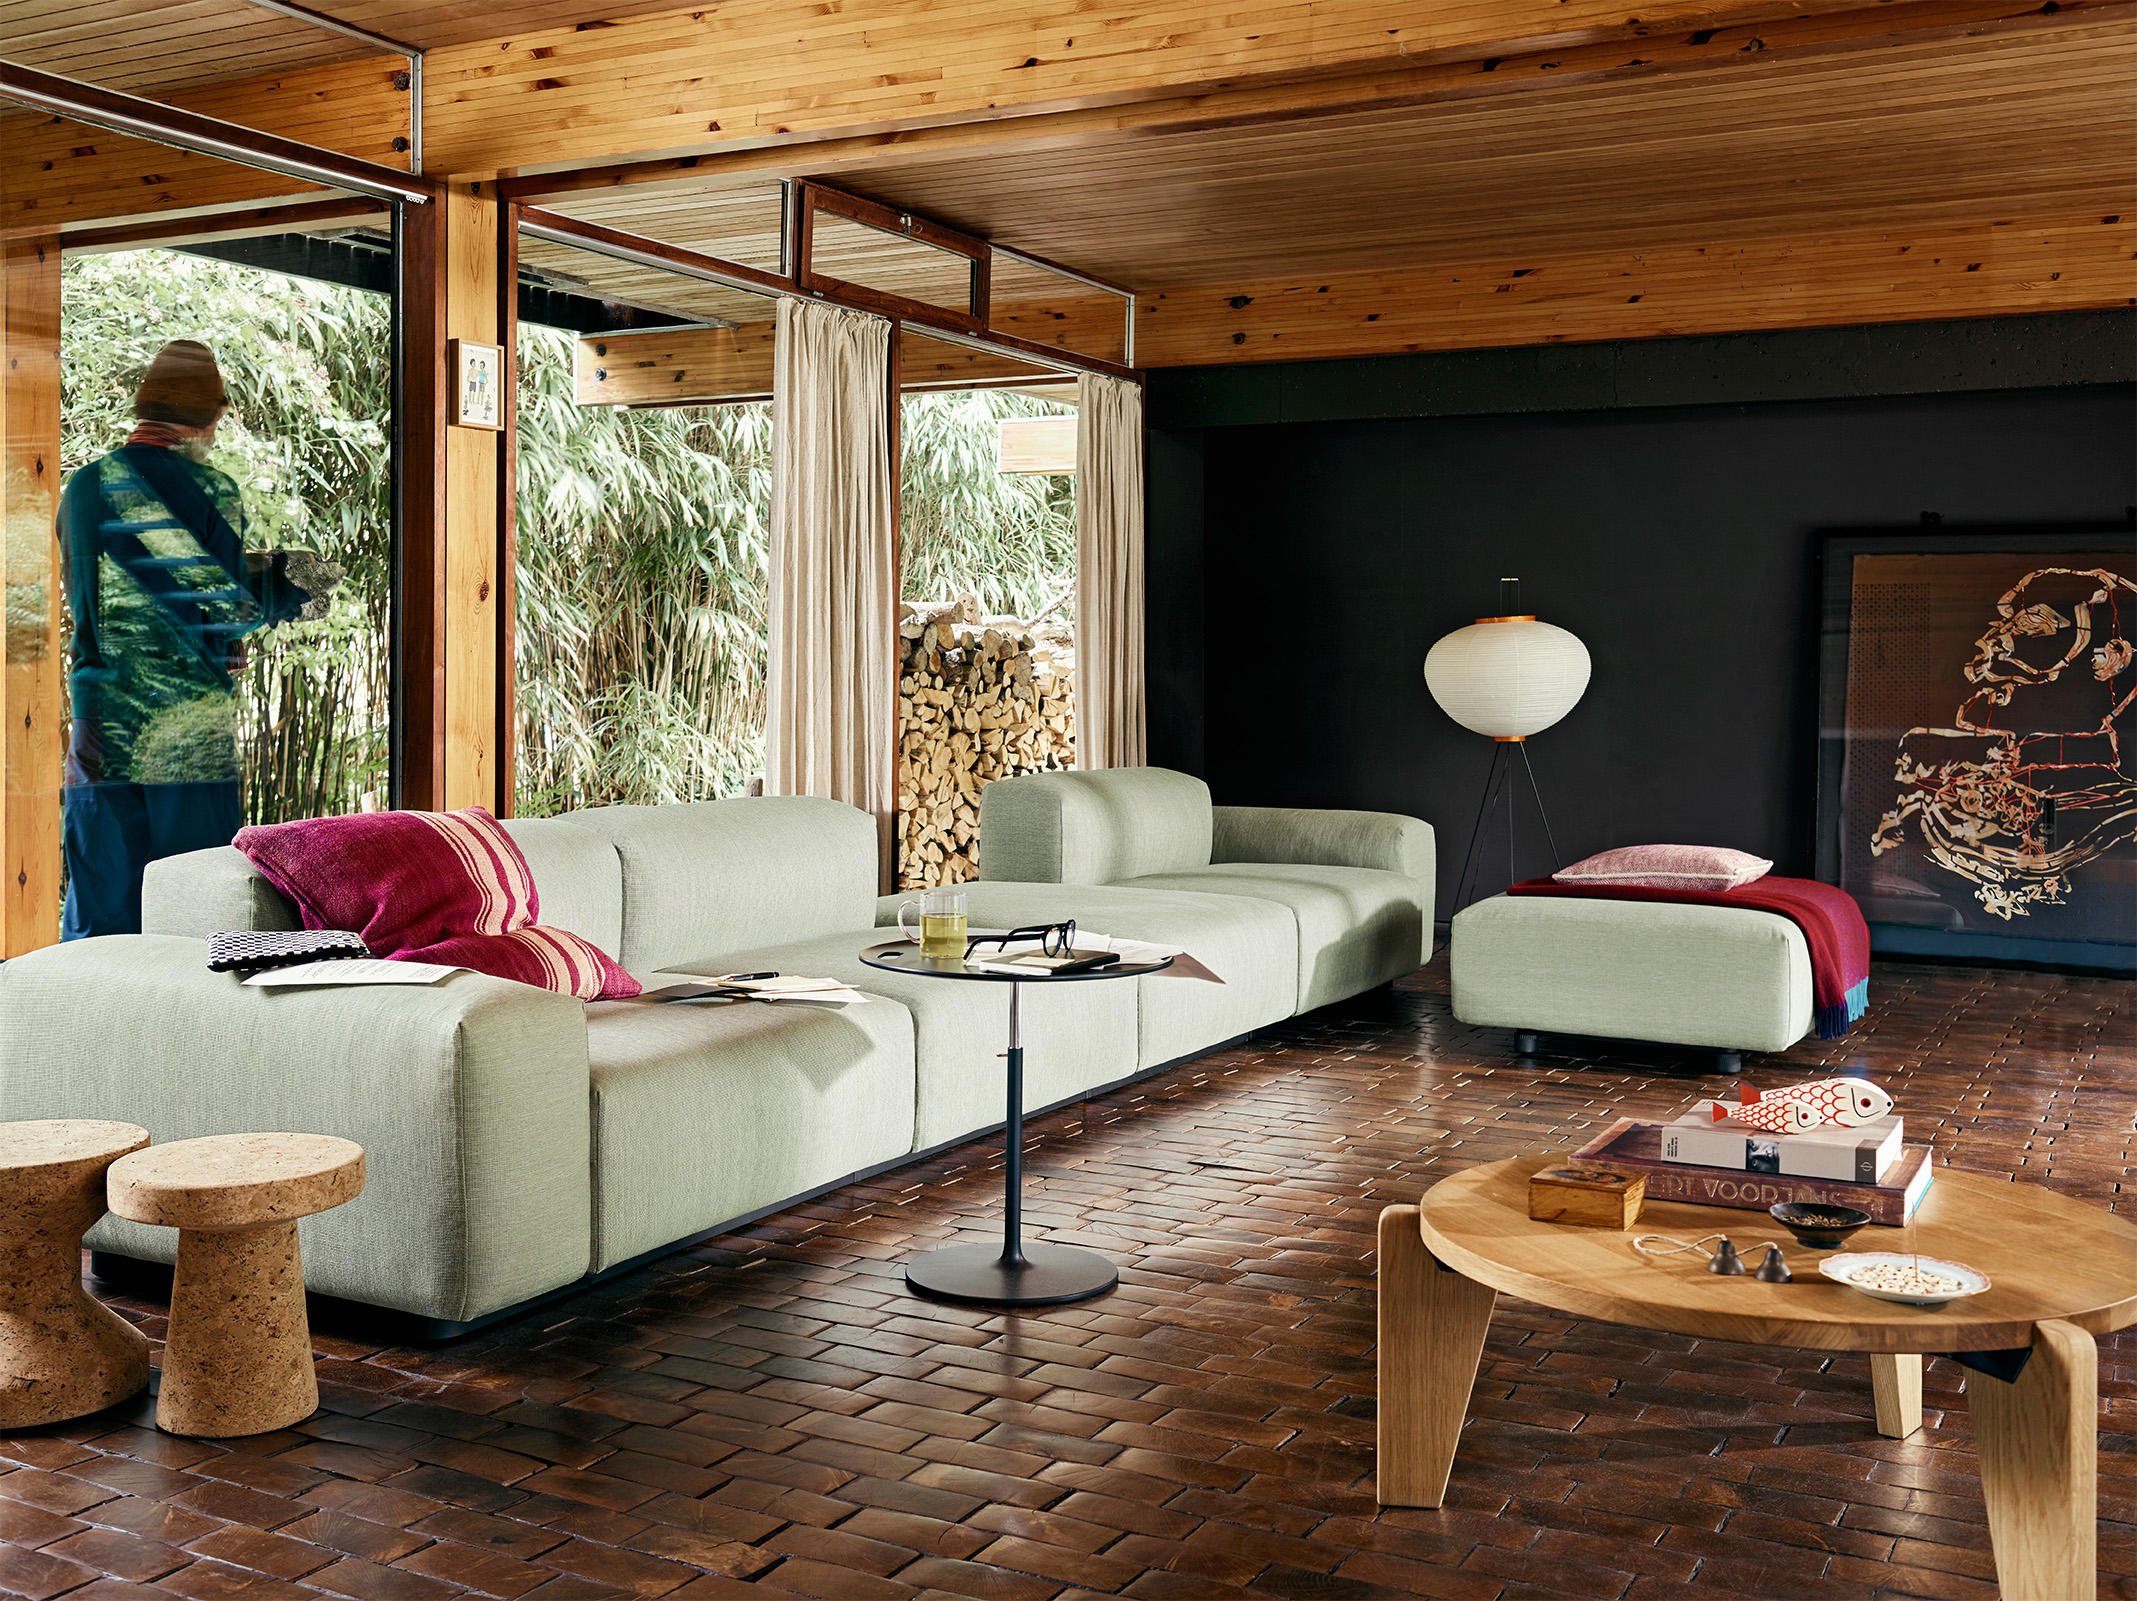 Voorverkoop smog Actief Vitra on Twitter: "The Soft Modular Sofa by Jasper Morrison unites the  characteristics of a modular lounge sofa in its purest form.  https://t.co/aNjzwDzKsU #vitra #vitrahomestories https://t.co/gD37GsE7Mc" /  Twitter